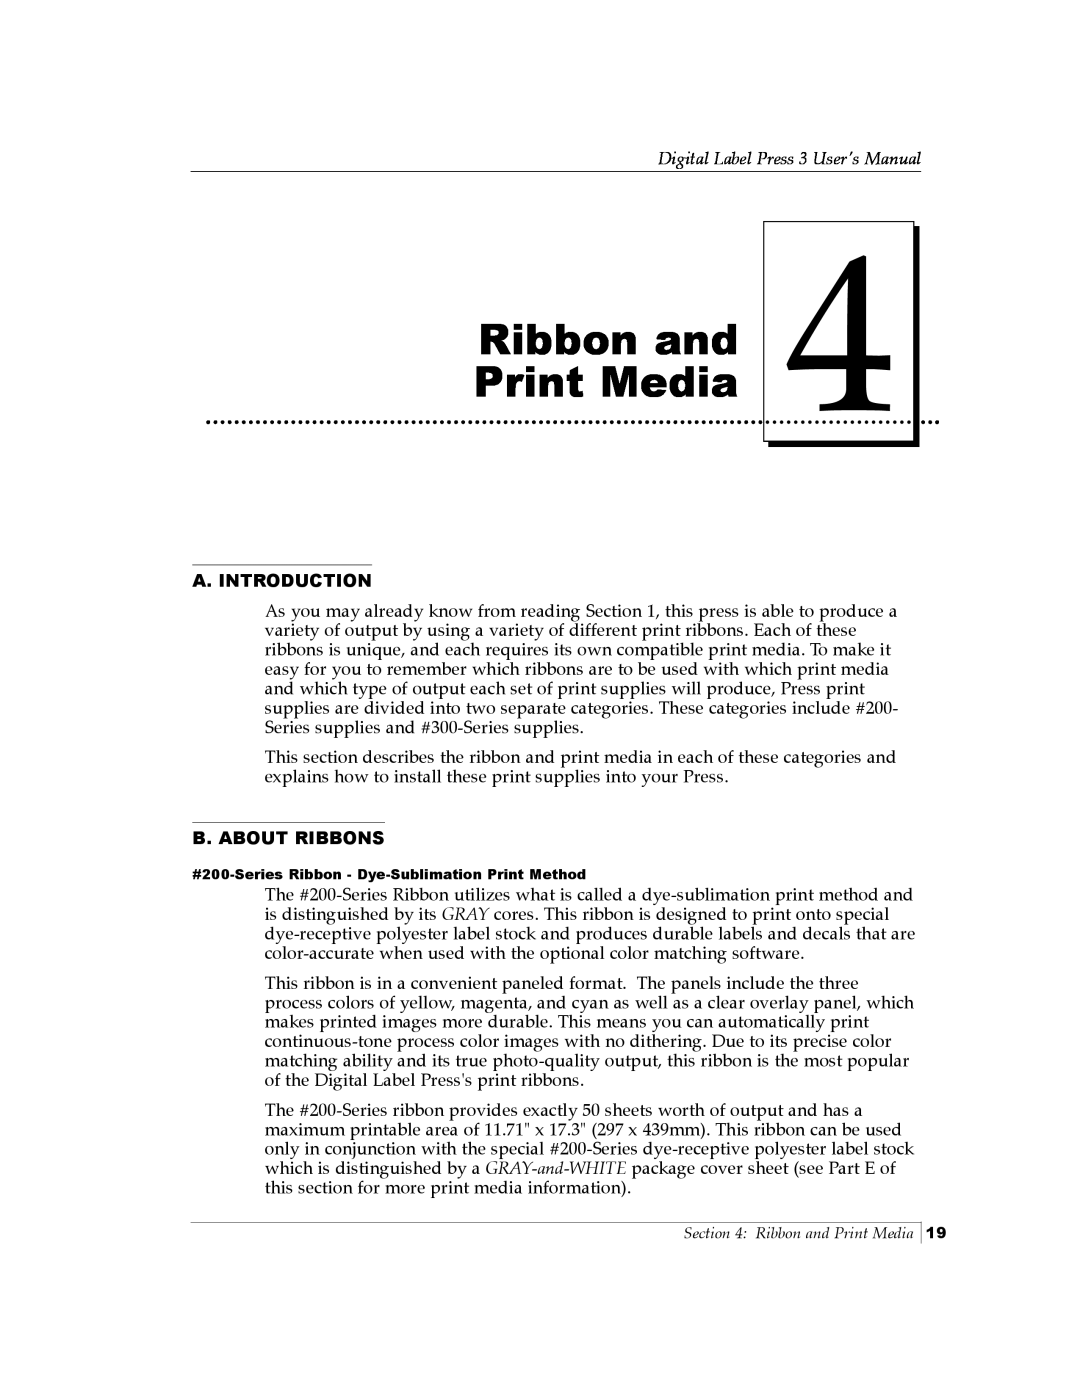 Primera Technology 510212 Ribbon and Print Media, A. Introduction, B. About Ribbons, Digital Label Press 3 User’s Manual 